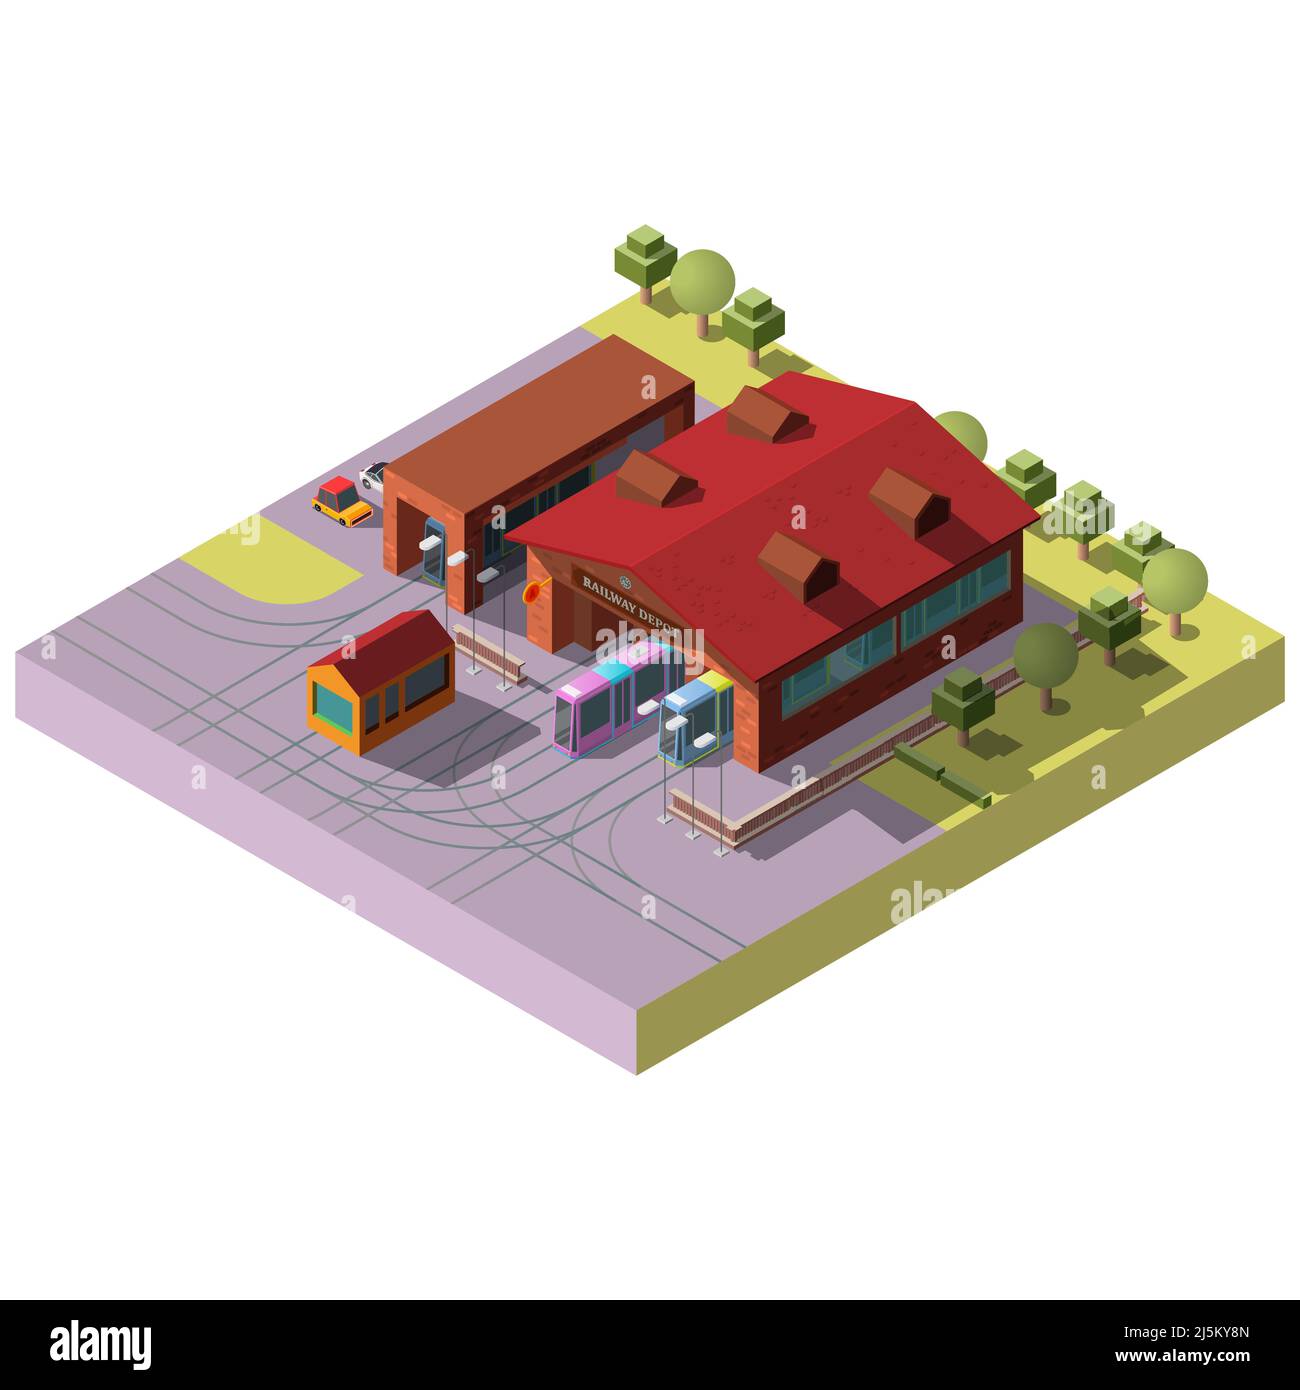 Railway depot isometric projection vector with trams, subway trains or passenger train locomotives standing in hangars, going on route illustration. C Stock Vector